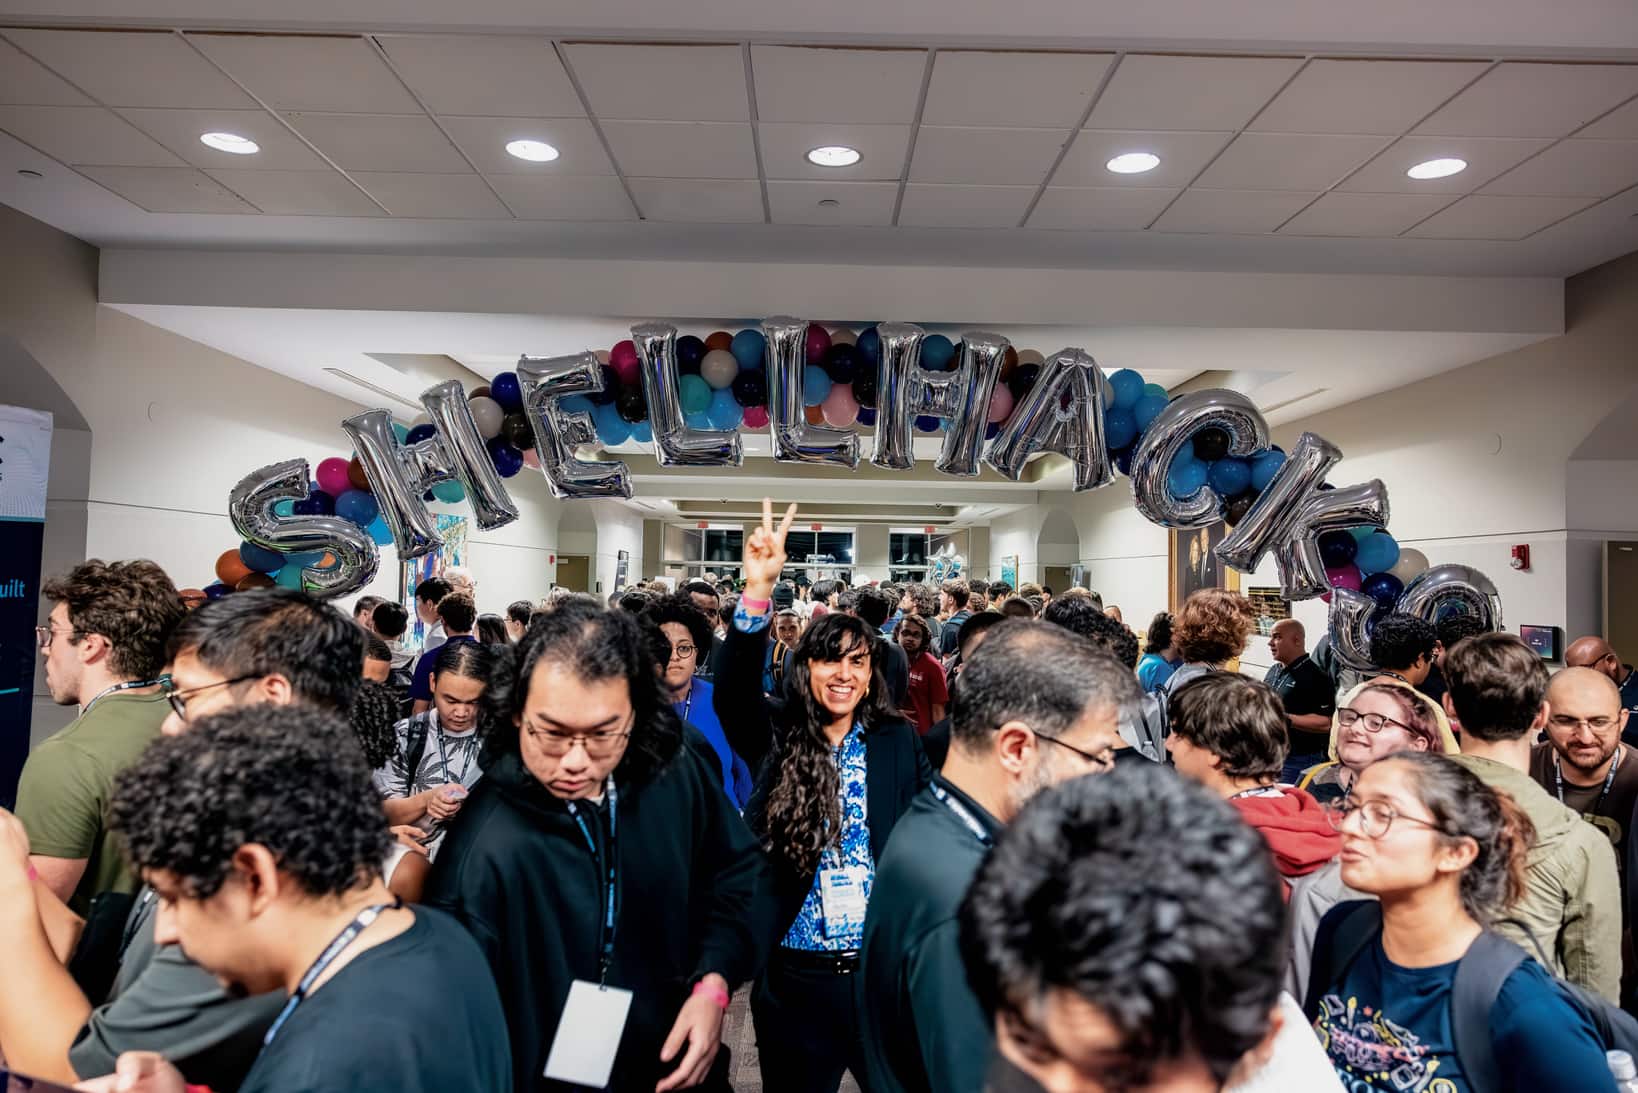 background image of shellhacks, the biggest hackathon in Florida, displaying a sea of software enginers networking and a young individual in the middle of it, smiling and making a peace sign in the middle of the crowd